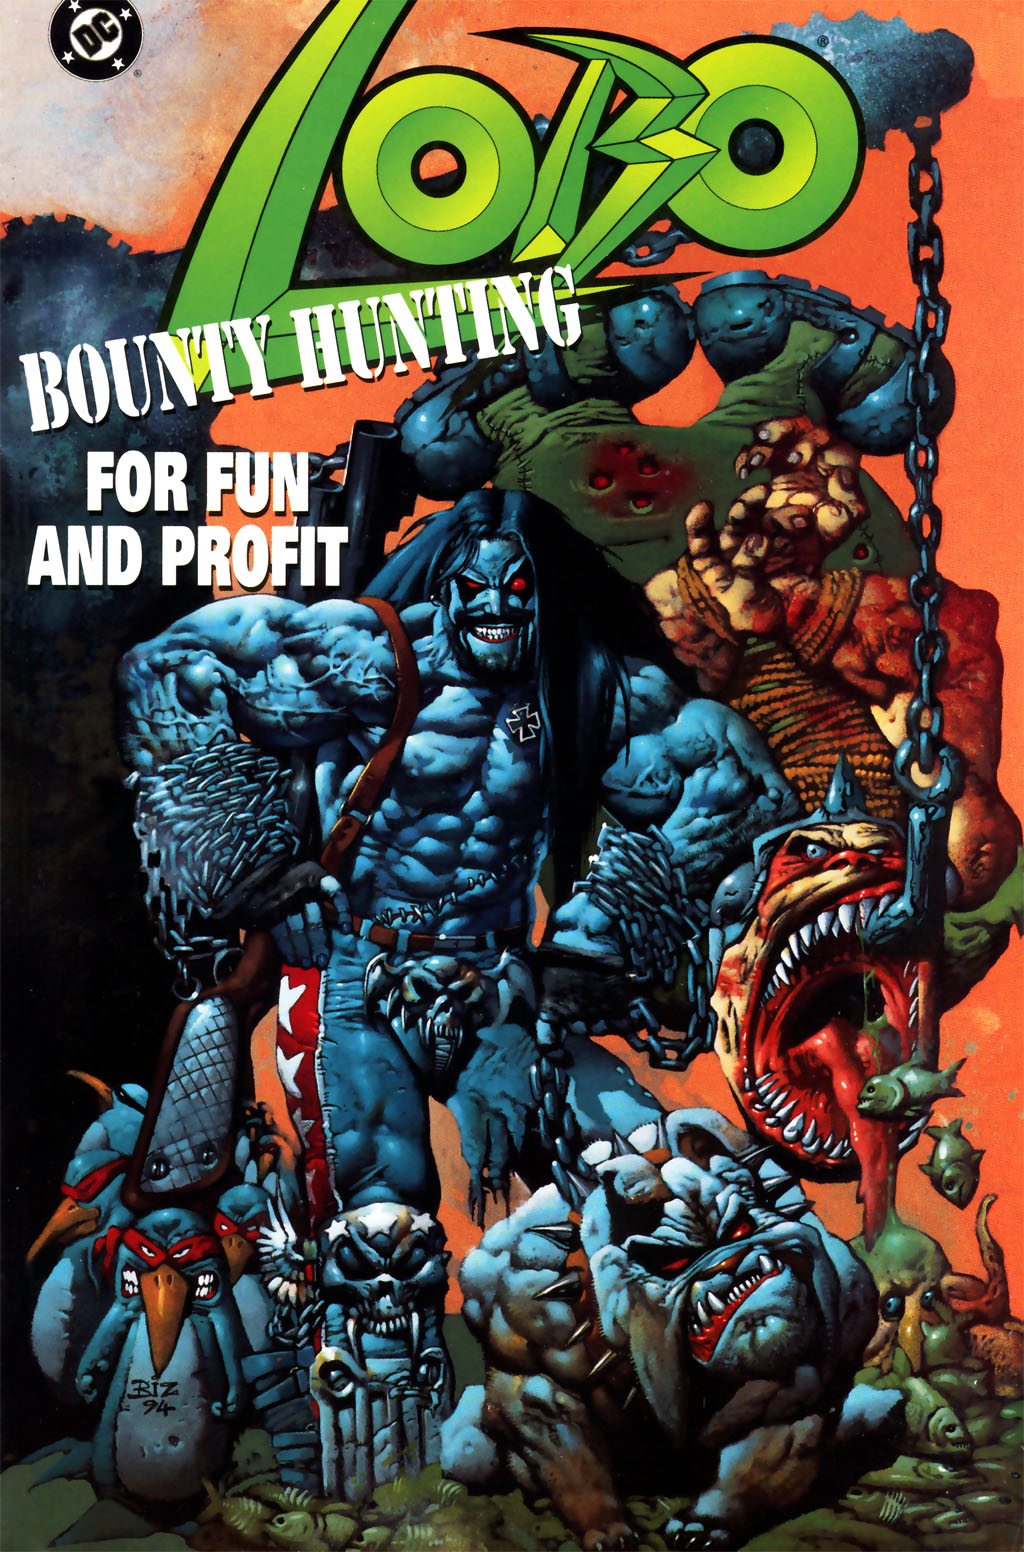 Read online Lobo: Bounty Hunting for Fun and Profit comic -  Issue # Full - 1